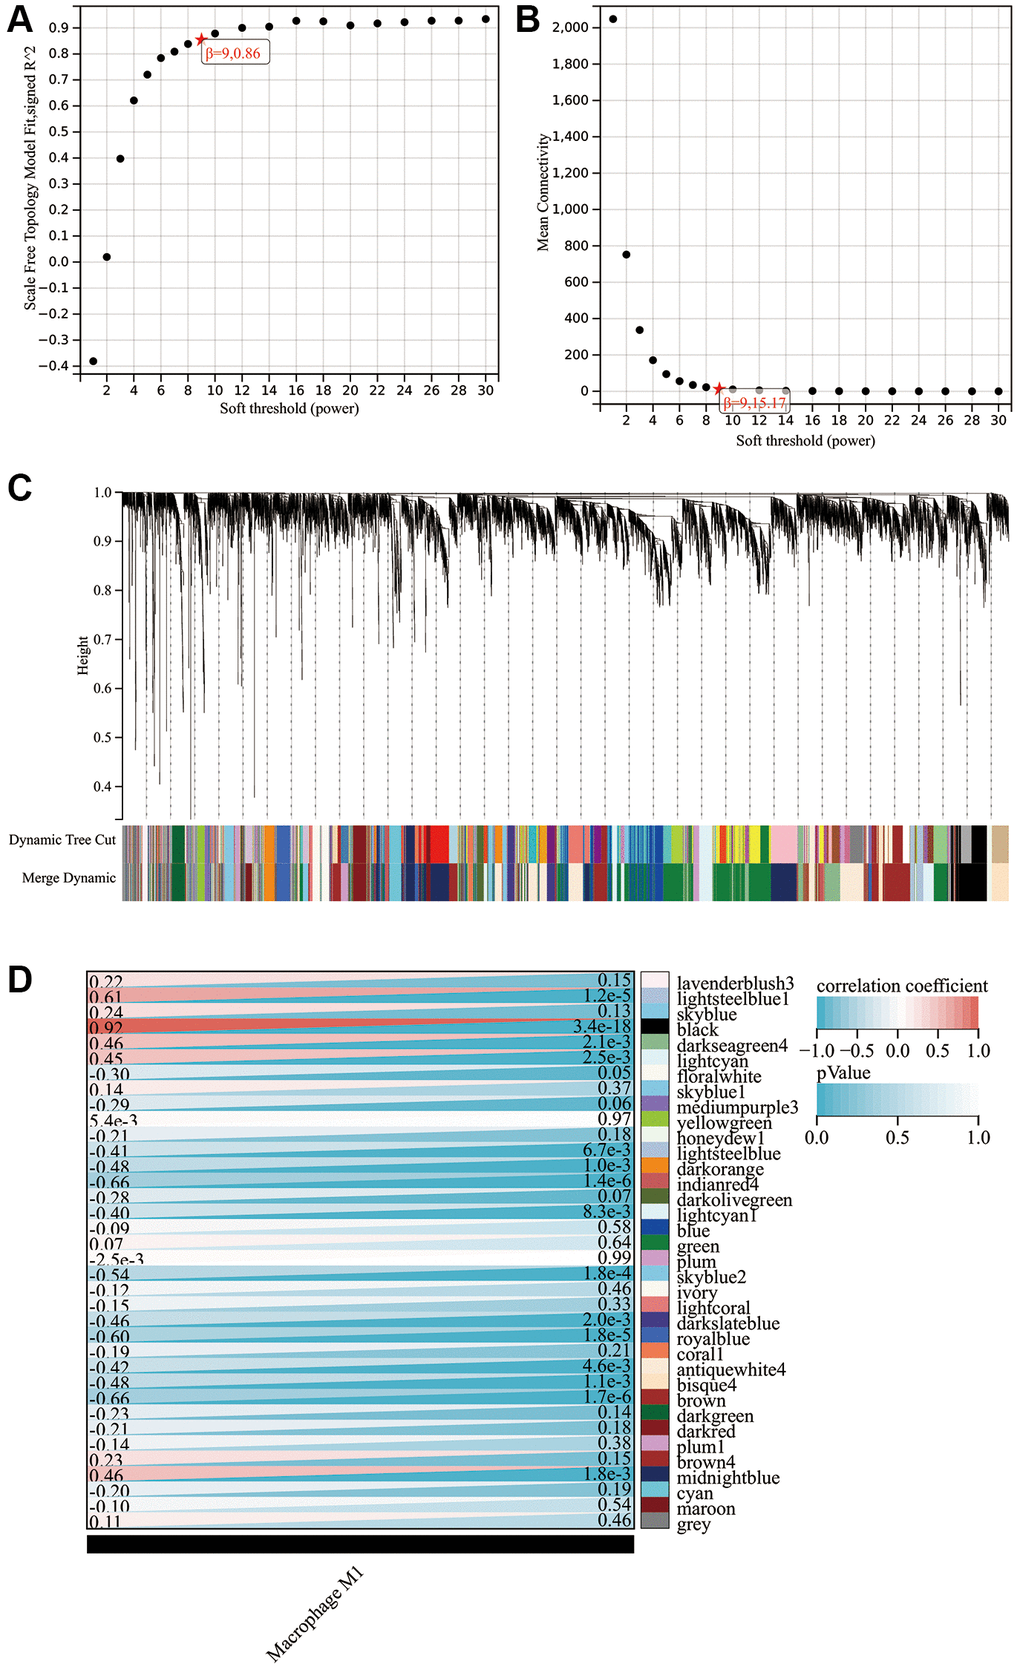 WGCNA findings. (A) Scale independence plot. (B) Mean connectivity plot. (C) Gene clustering dendrogram. (D) Heat map showing the correlation between modules and M1 macrophages.